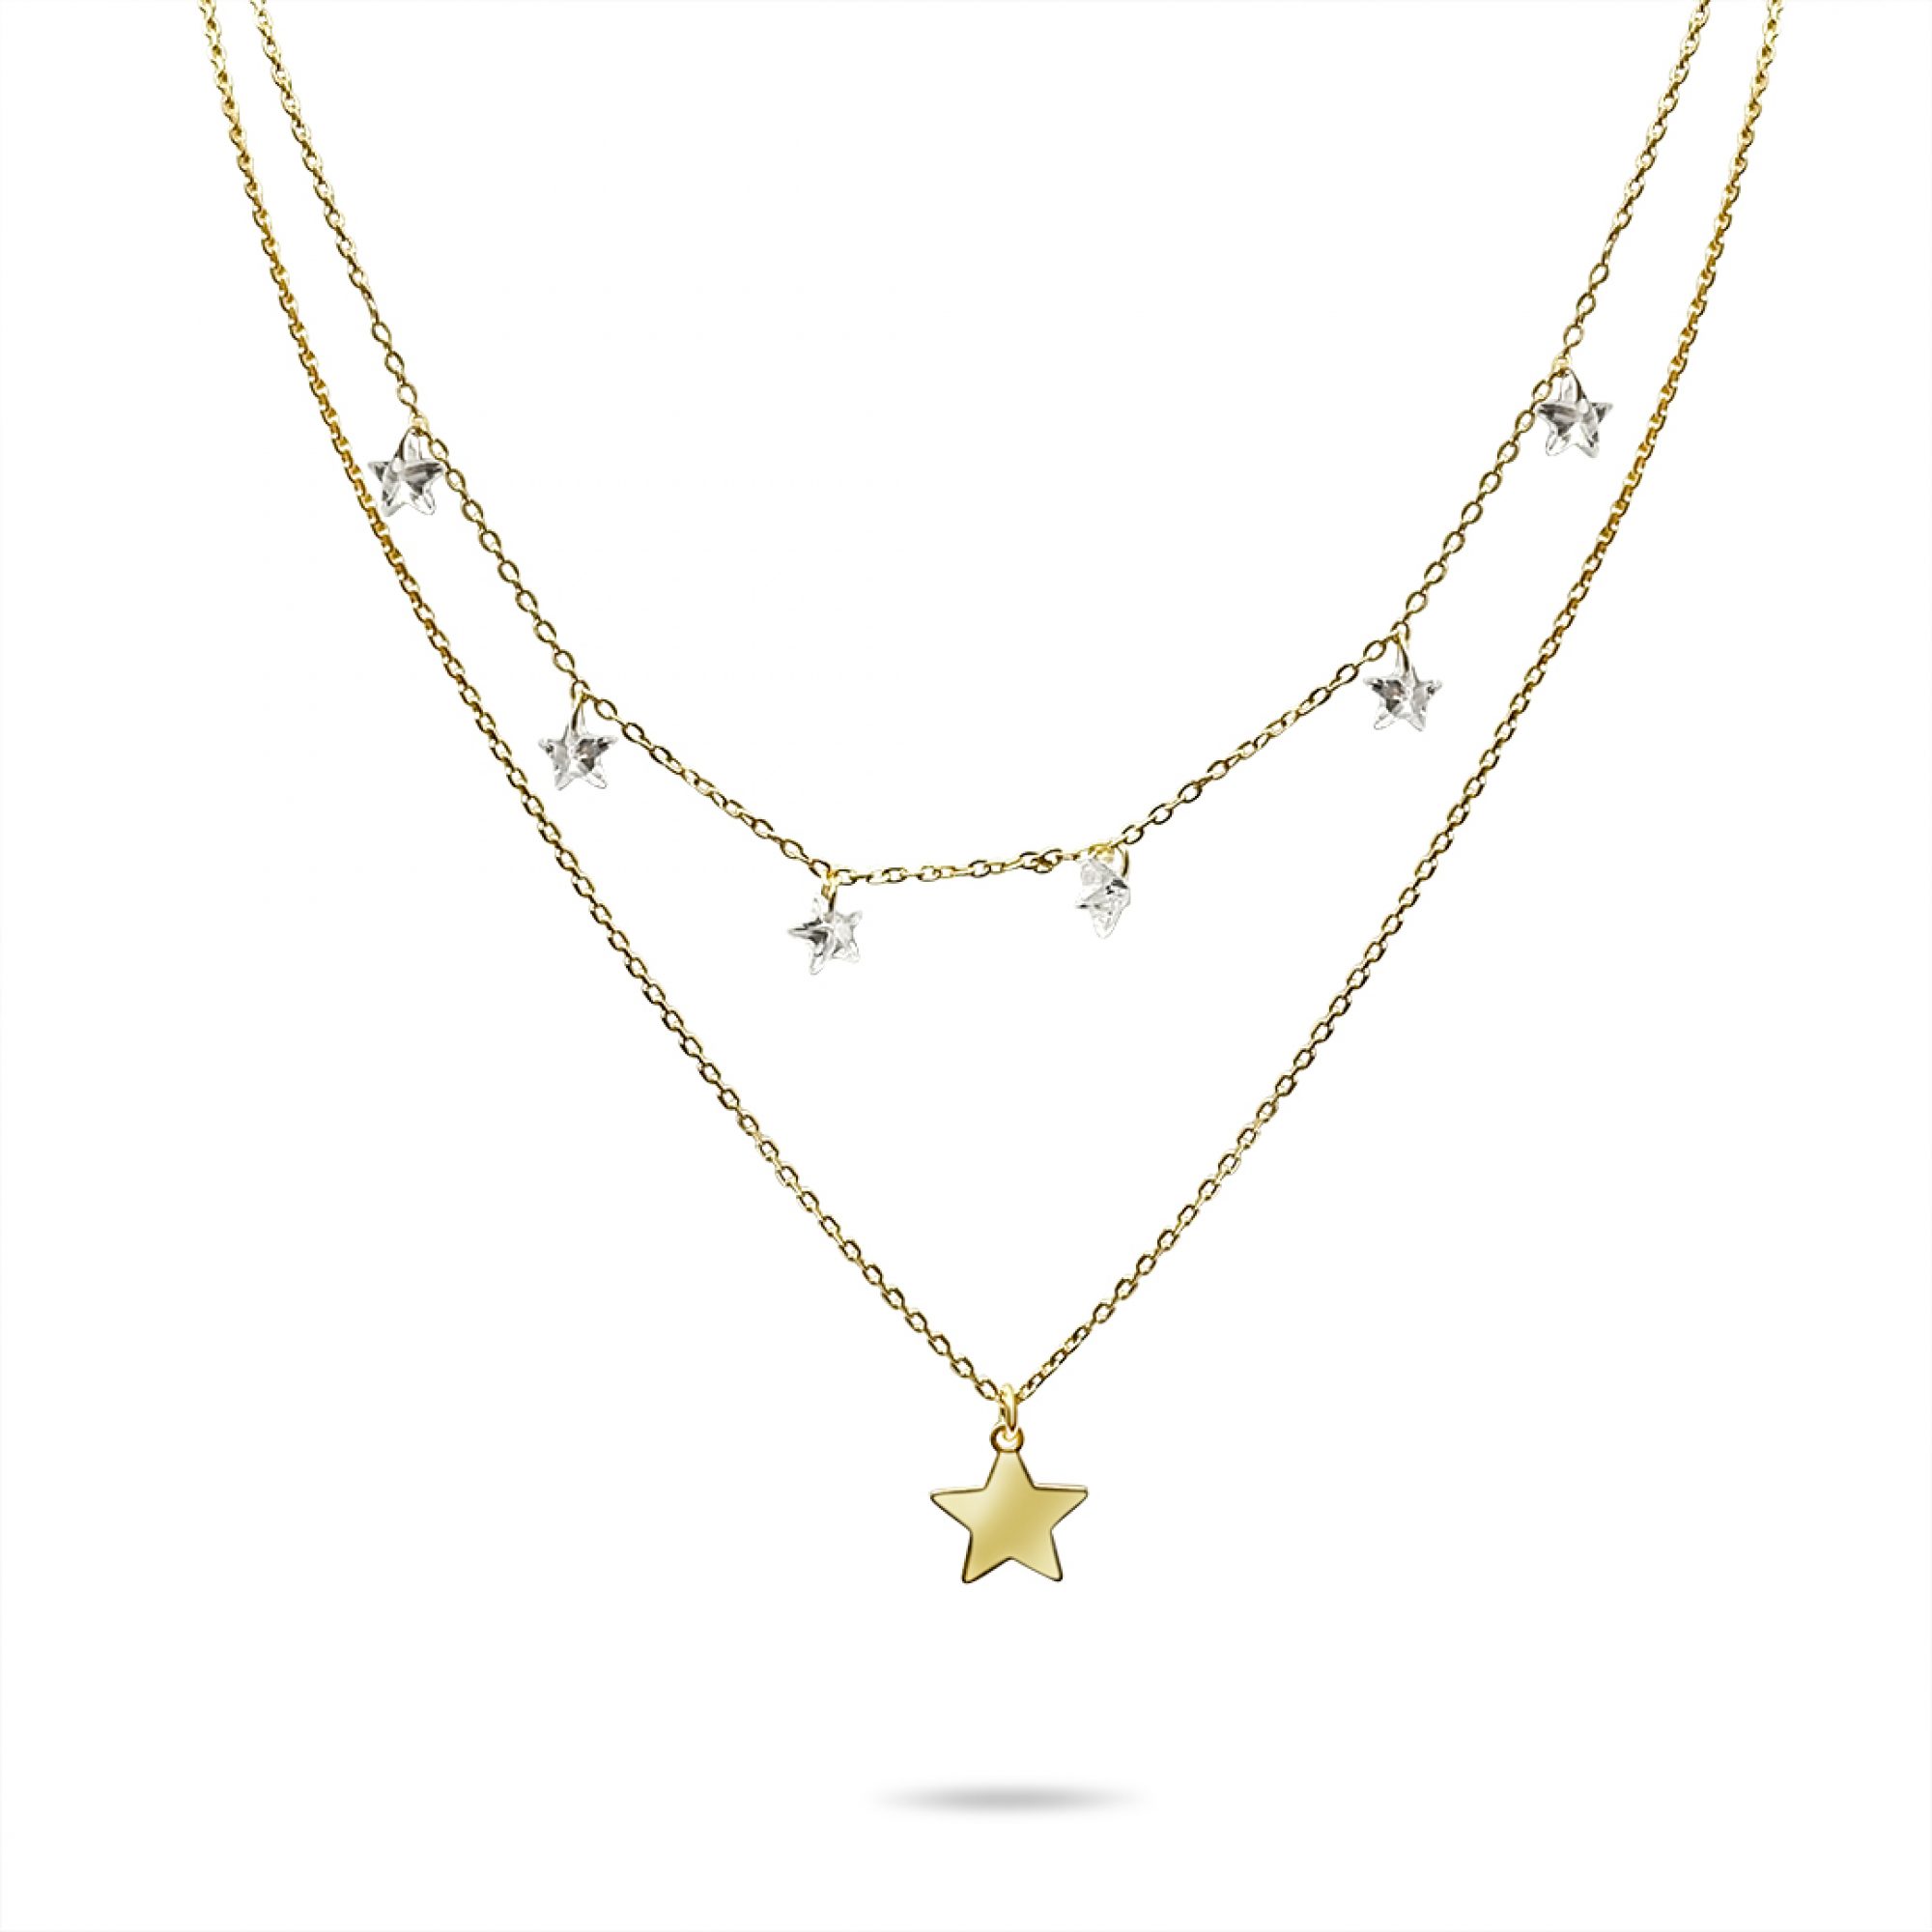 Double gold plated star necklace with zircon stones